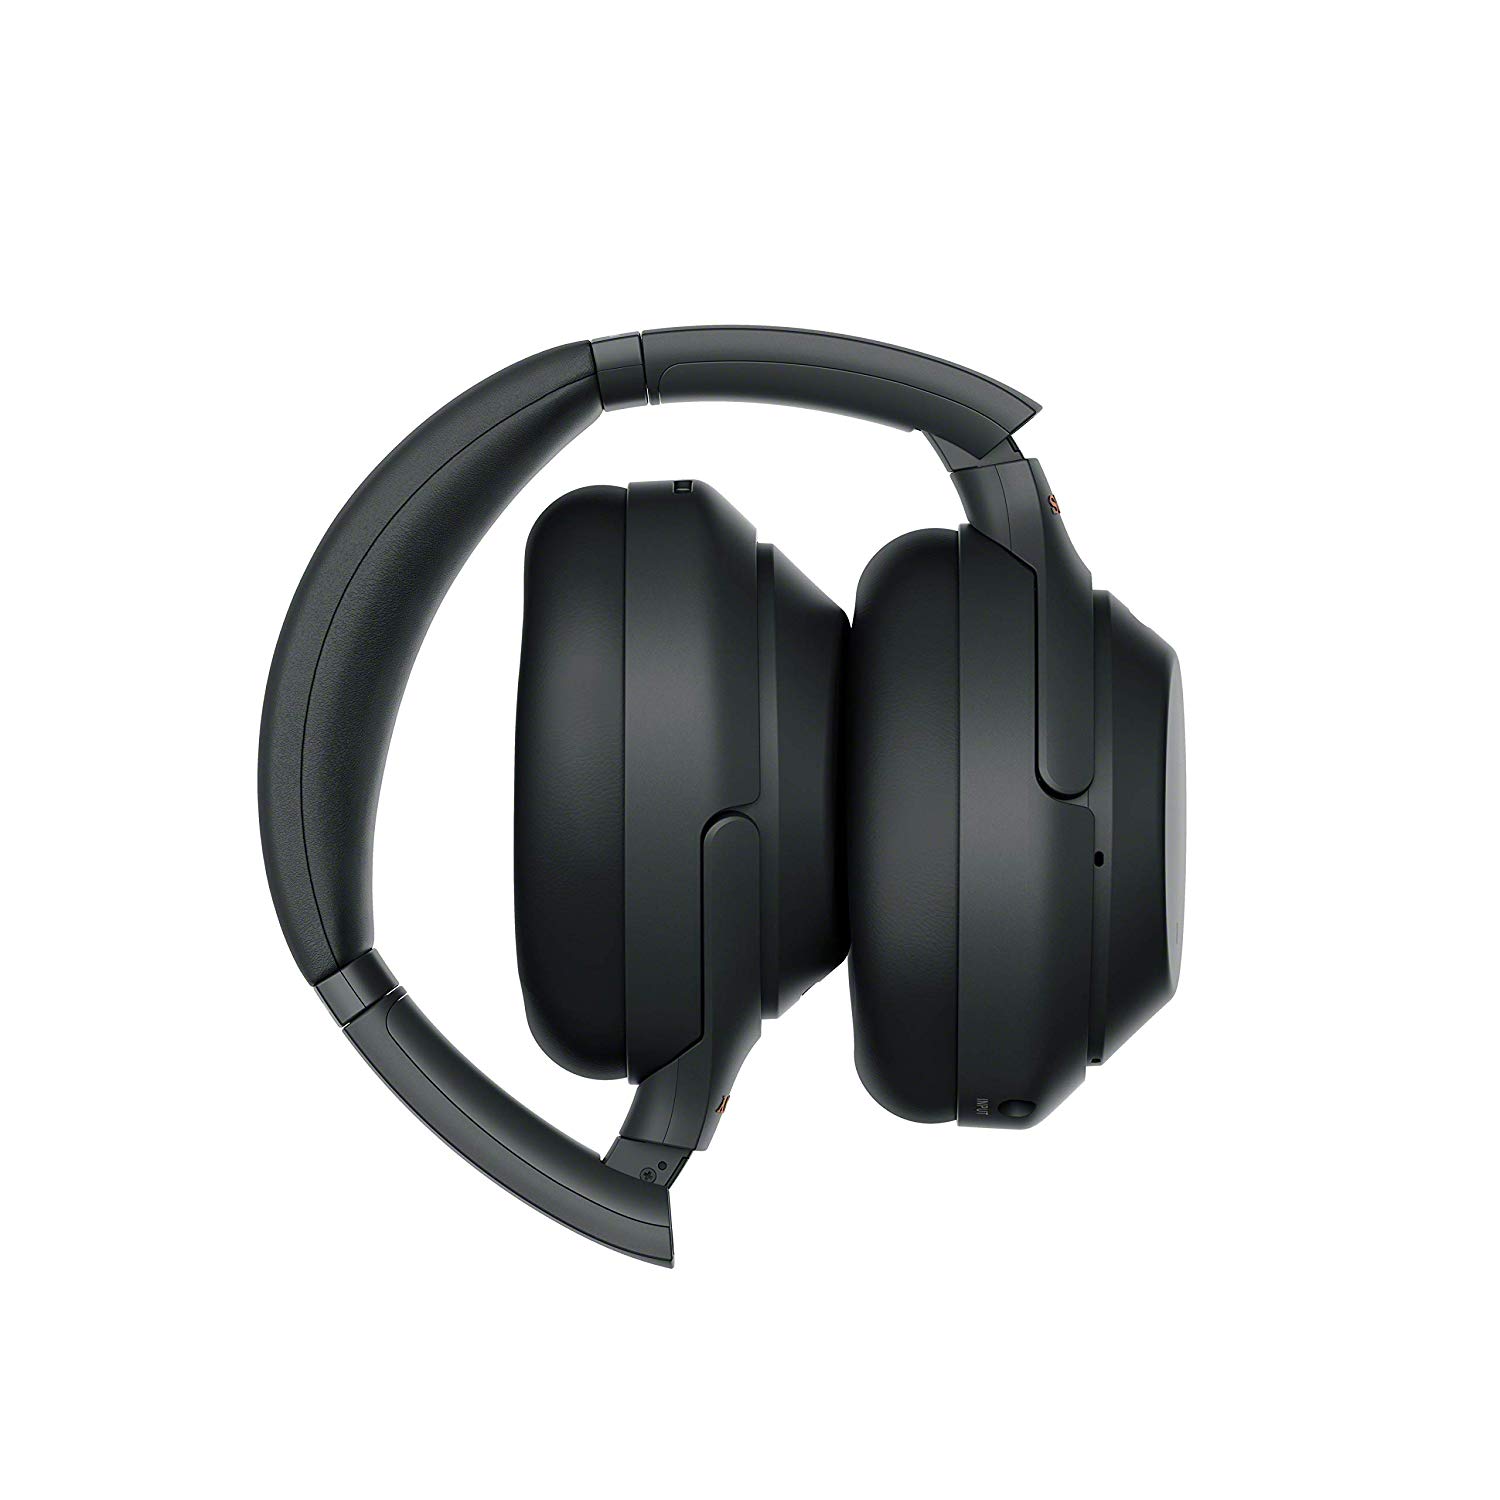 Sony’s Amazing WH1000XM3 Wireless Noise Cancelling Headphones: Spare up-to 100$